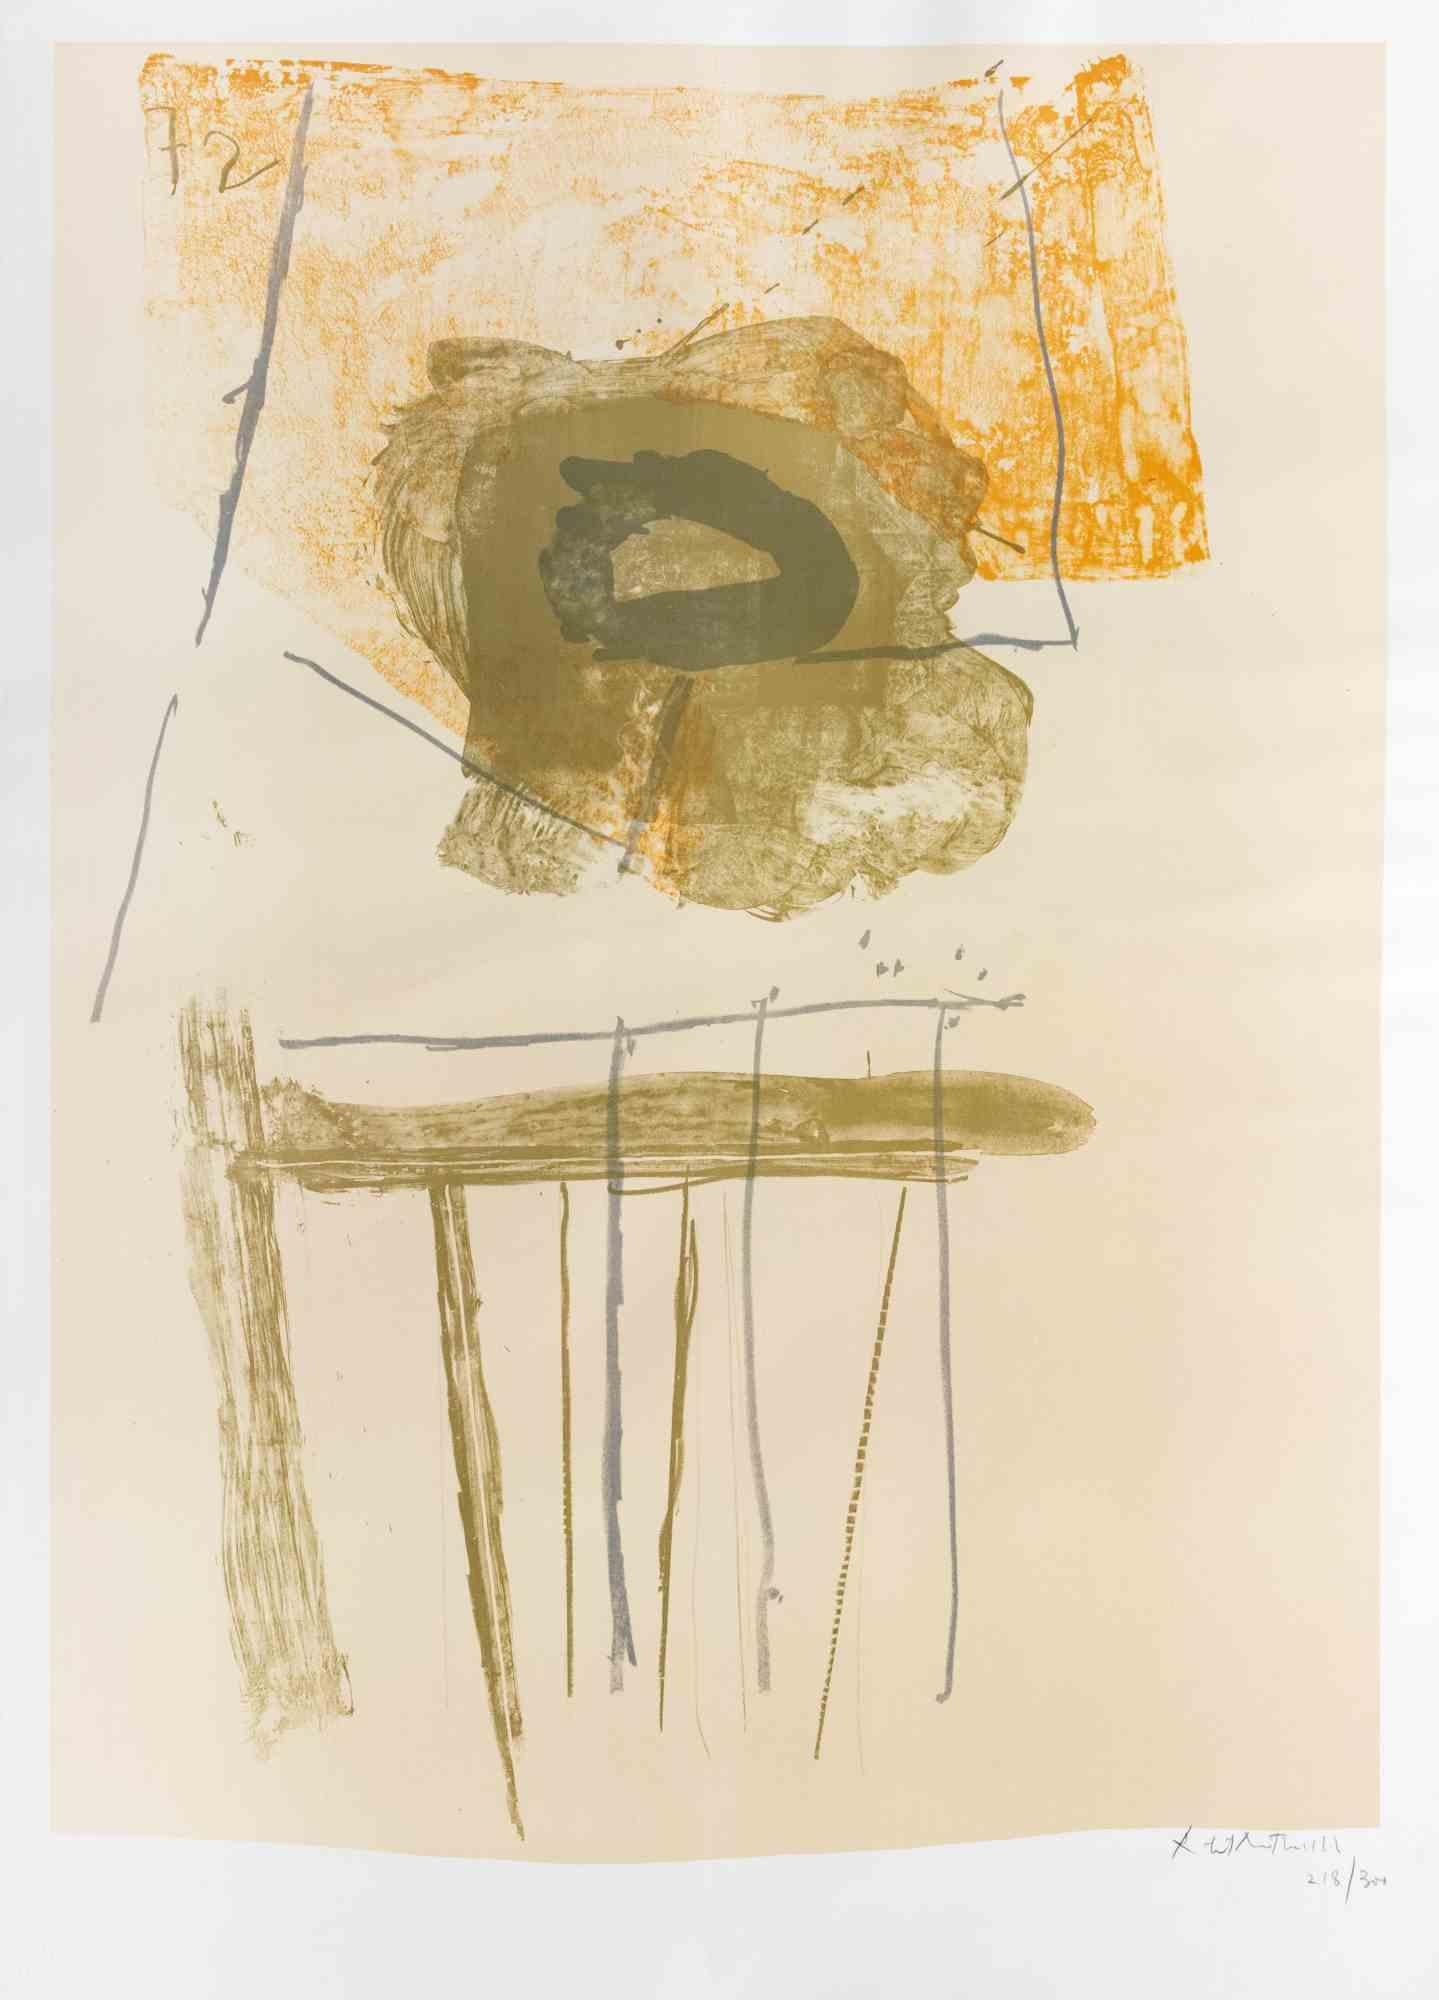 Chair is a colored lithograph on Velin realized by Robert Motherwell in 1972.

This artwork is hand-signed and numbered by the artist on the lower right. From an edition of 218/300 prints. 

Reference: Catalogue raisonné Engberg/Banach n.